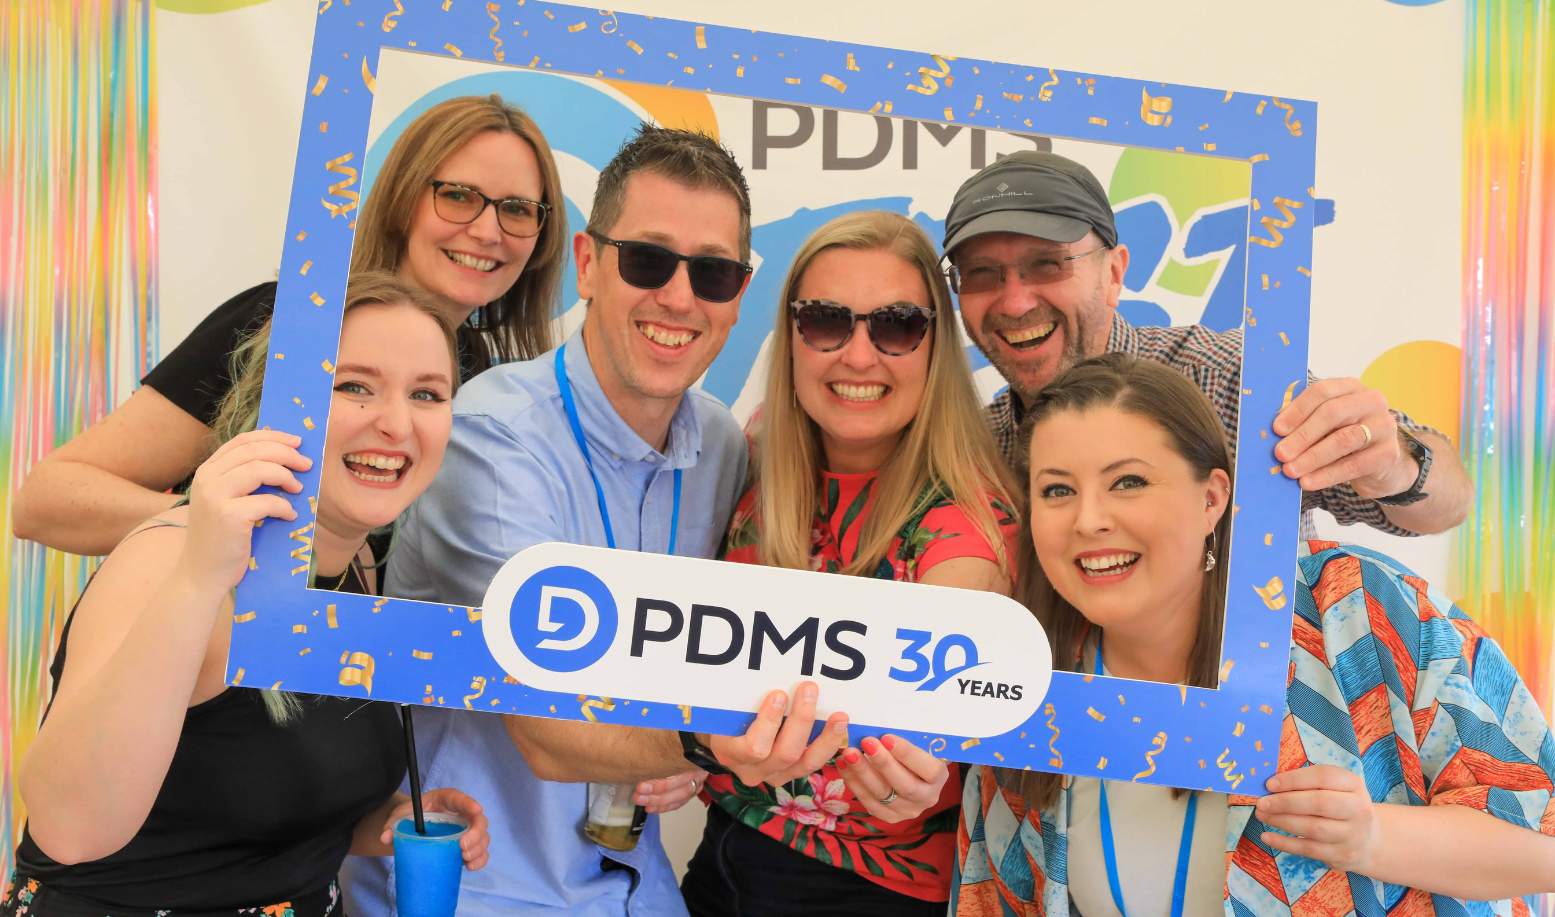  A group of people smiling for a photo with a PDMS 30 years frame